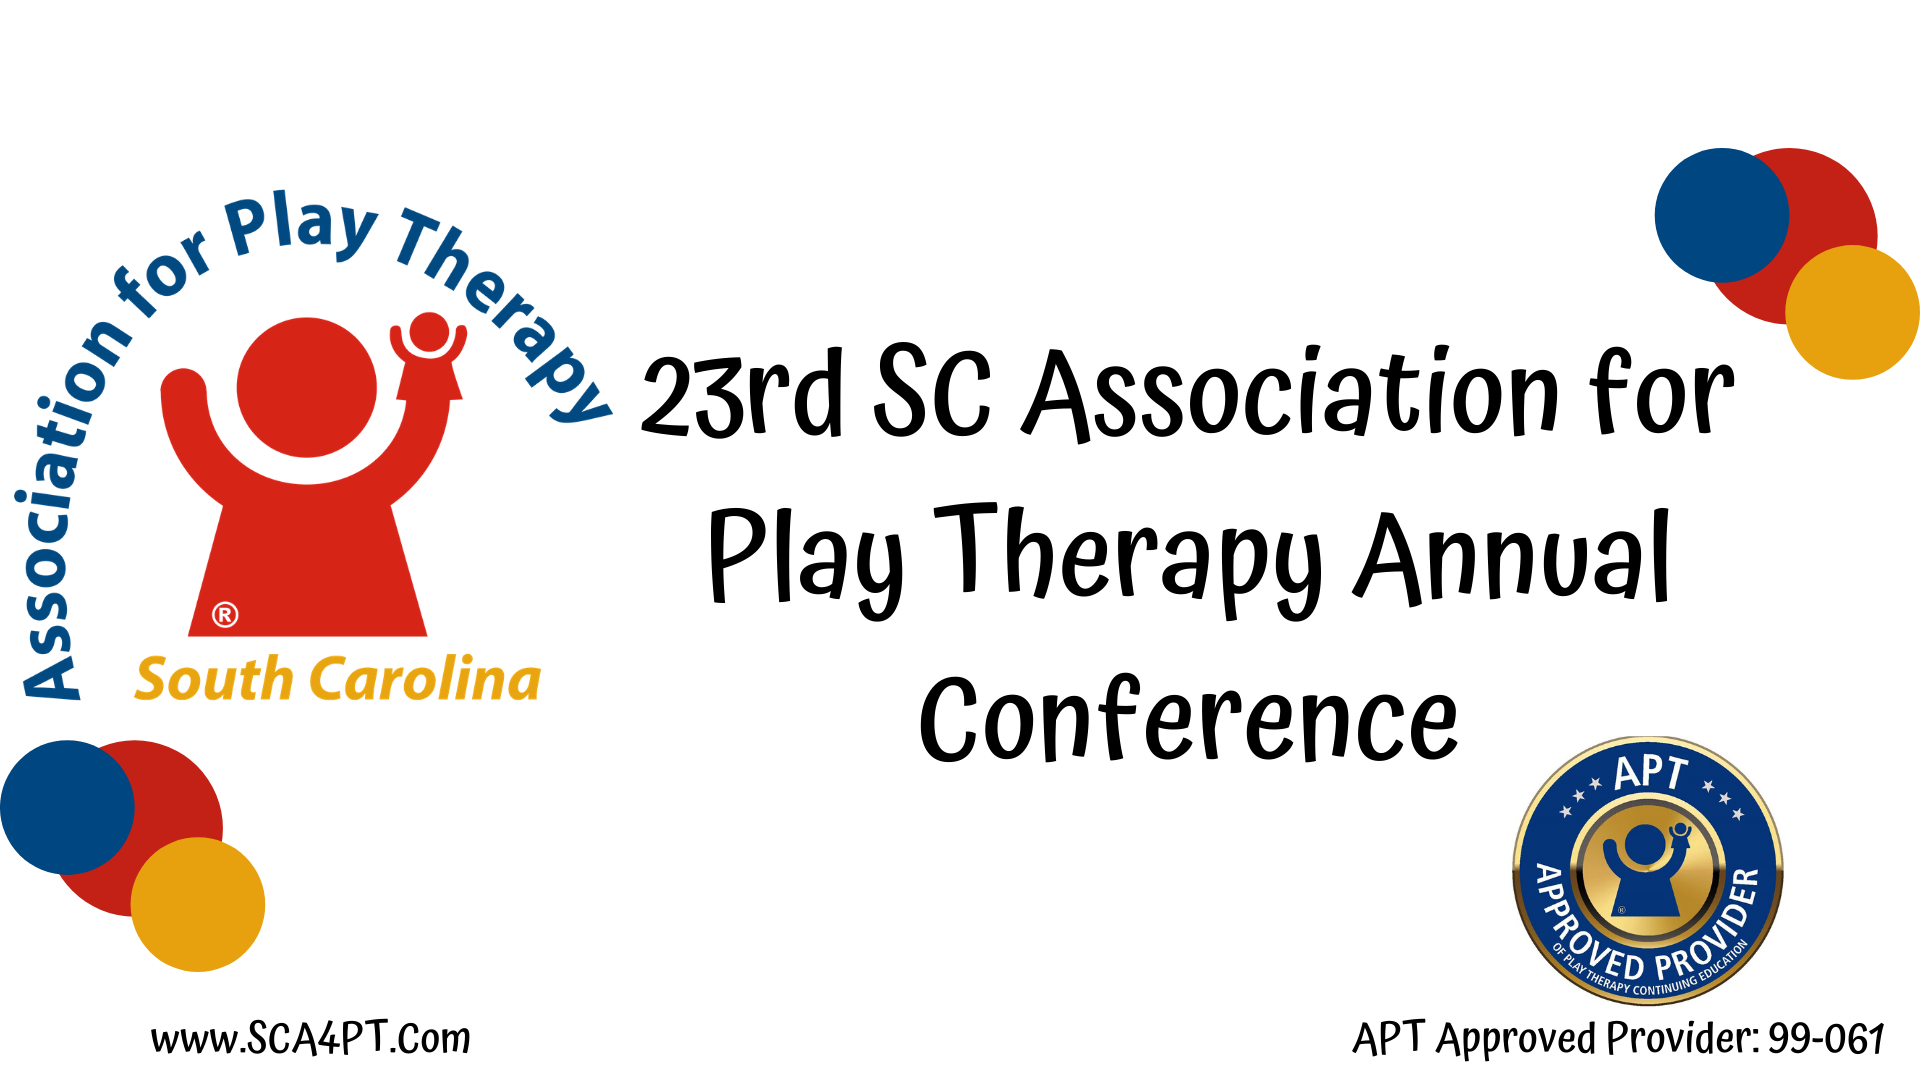 The 23rd SC Association for Play Therapy Annual Conference 10 SEP 2021